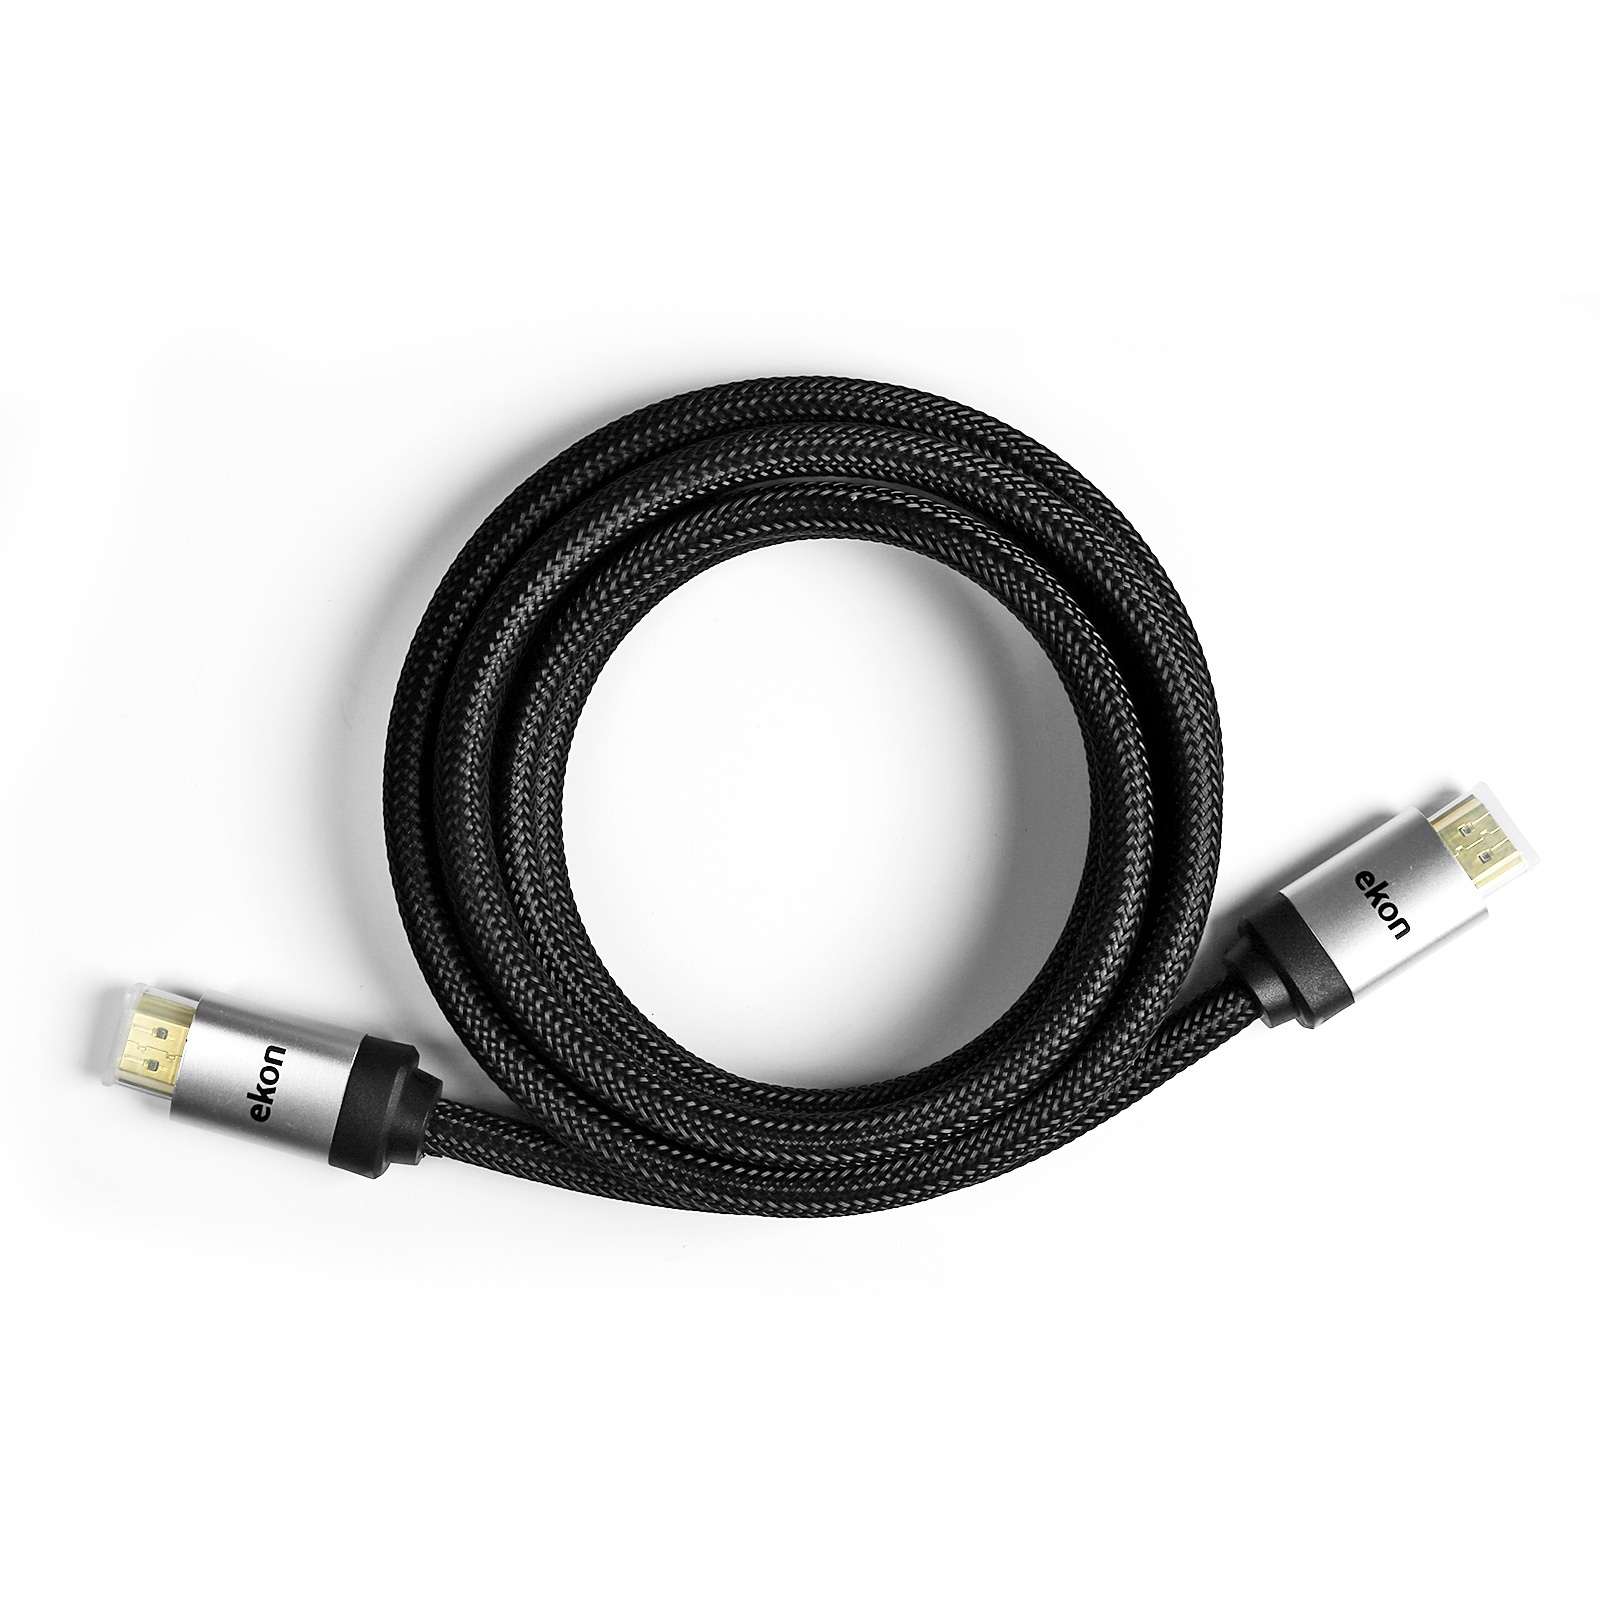 EKON HDMI V 1.4 cable male to male high speed with ethernet. OD 6.0mm.  Conductor pure copper,30 AWG, jacket black color. Connector PVC black  color and gold plated, 90°. Shielding: Al-foil with al-mg braid. Total Lenght 1,8  mt